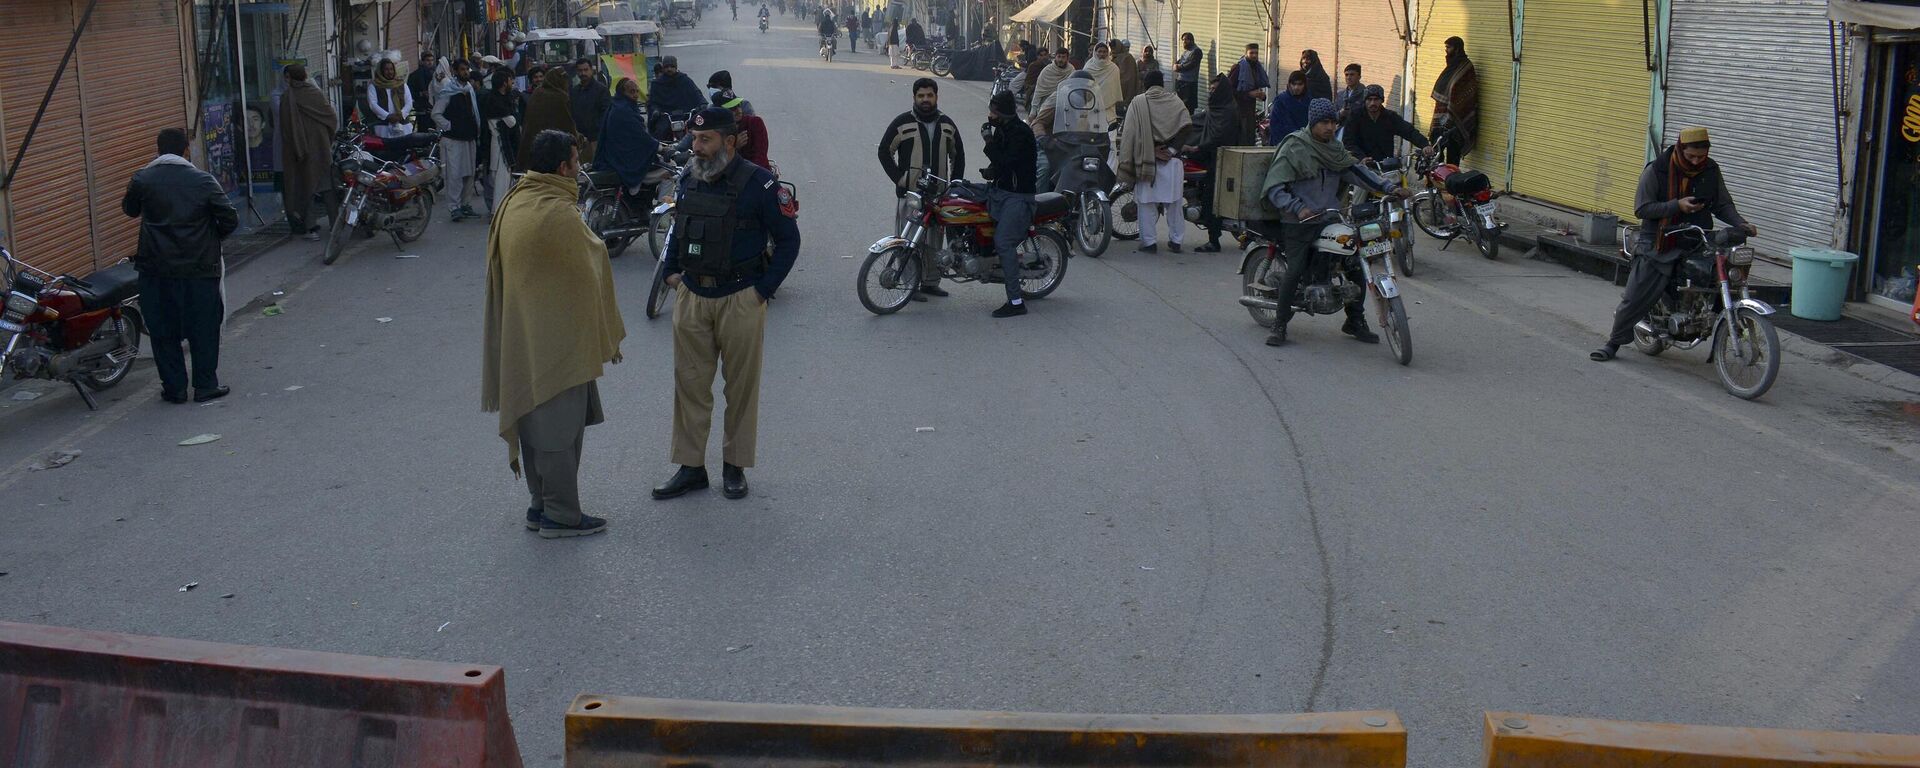 Security officials stand guard on a blocked road leading to a counter-terrorism center where several Pakistani Taliban detainees have taken police officers and others hostage inside the compound, in Bannu, a district in the Pakistan's Khyber Pakhtunkhwa province, Monday, Dec. 19, 2022. - Sputnik India, 1920, 20.12.2022